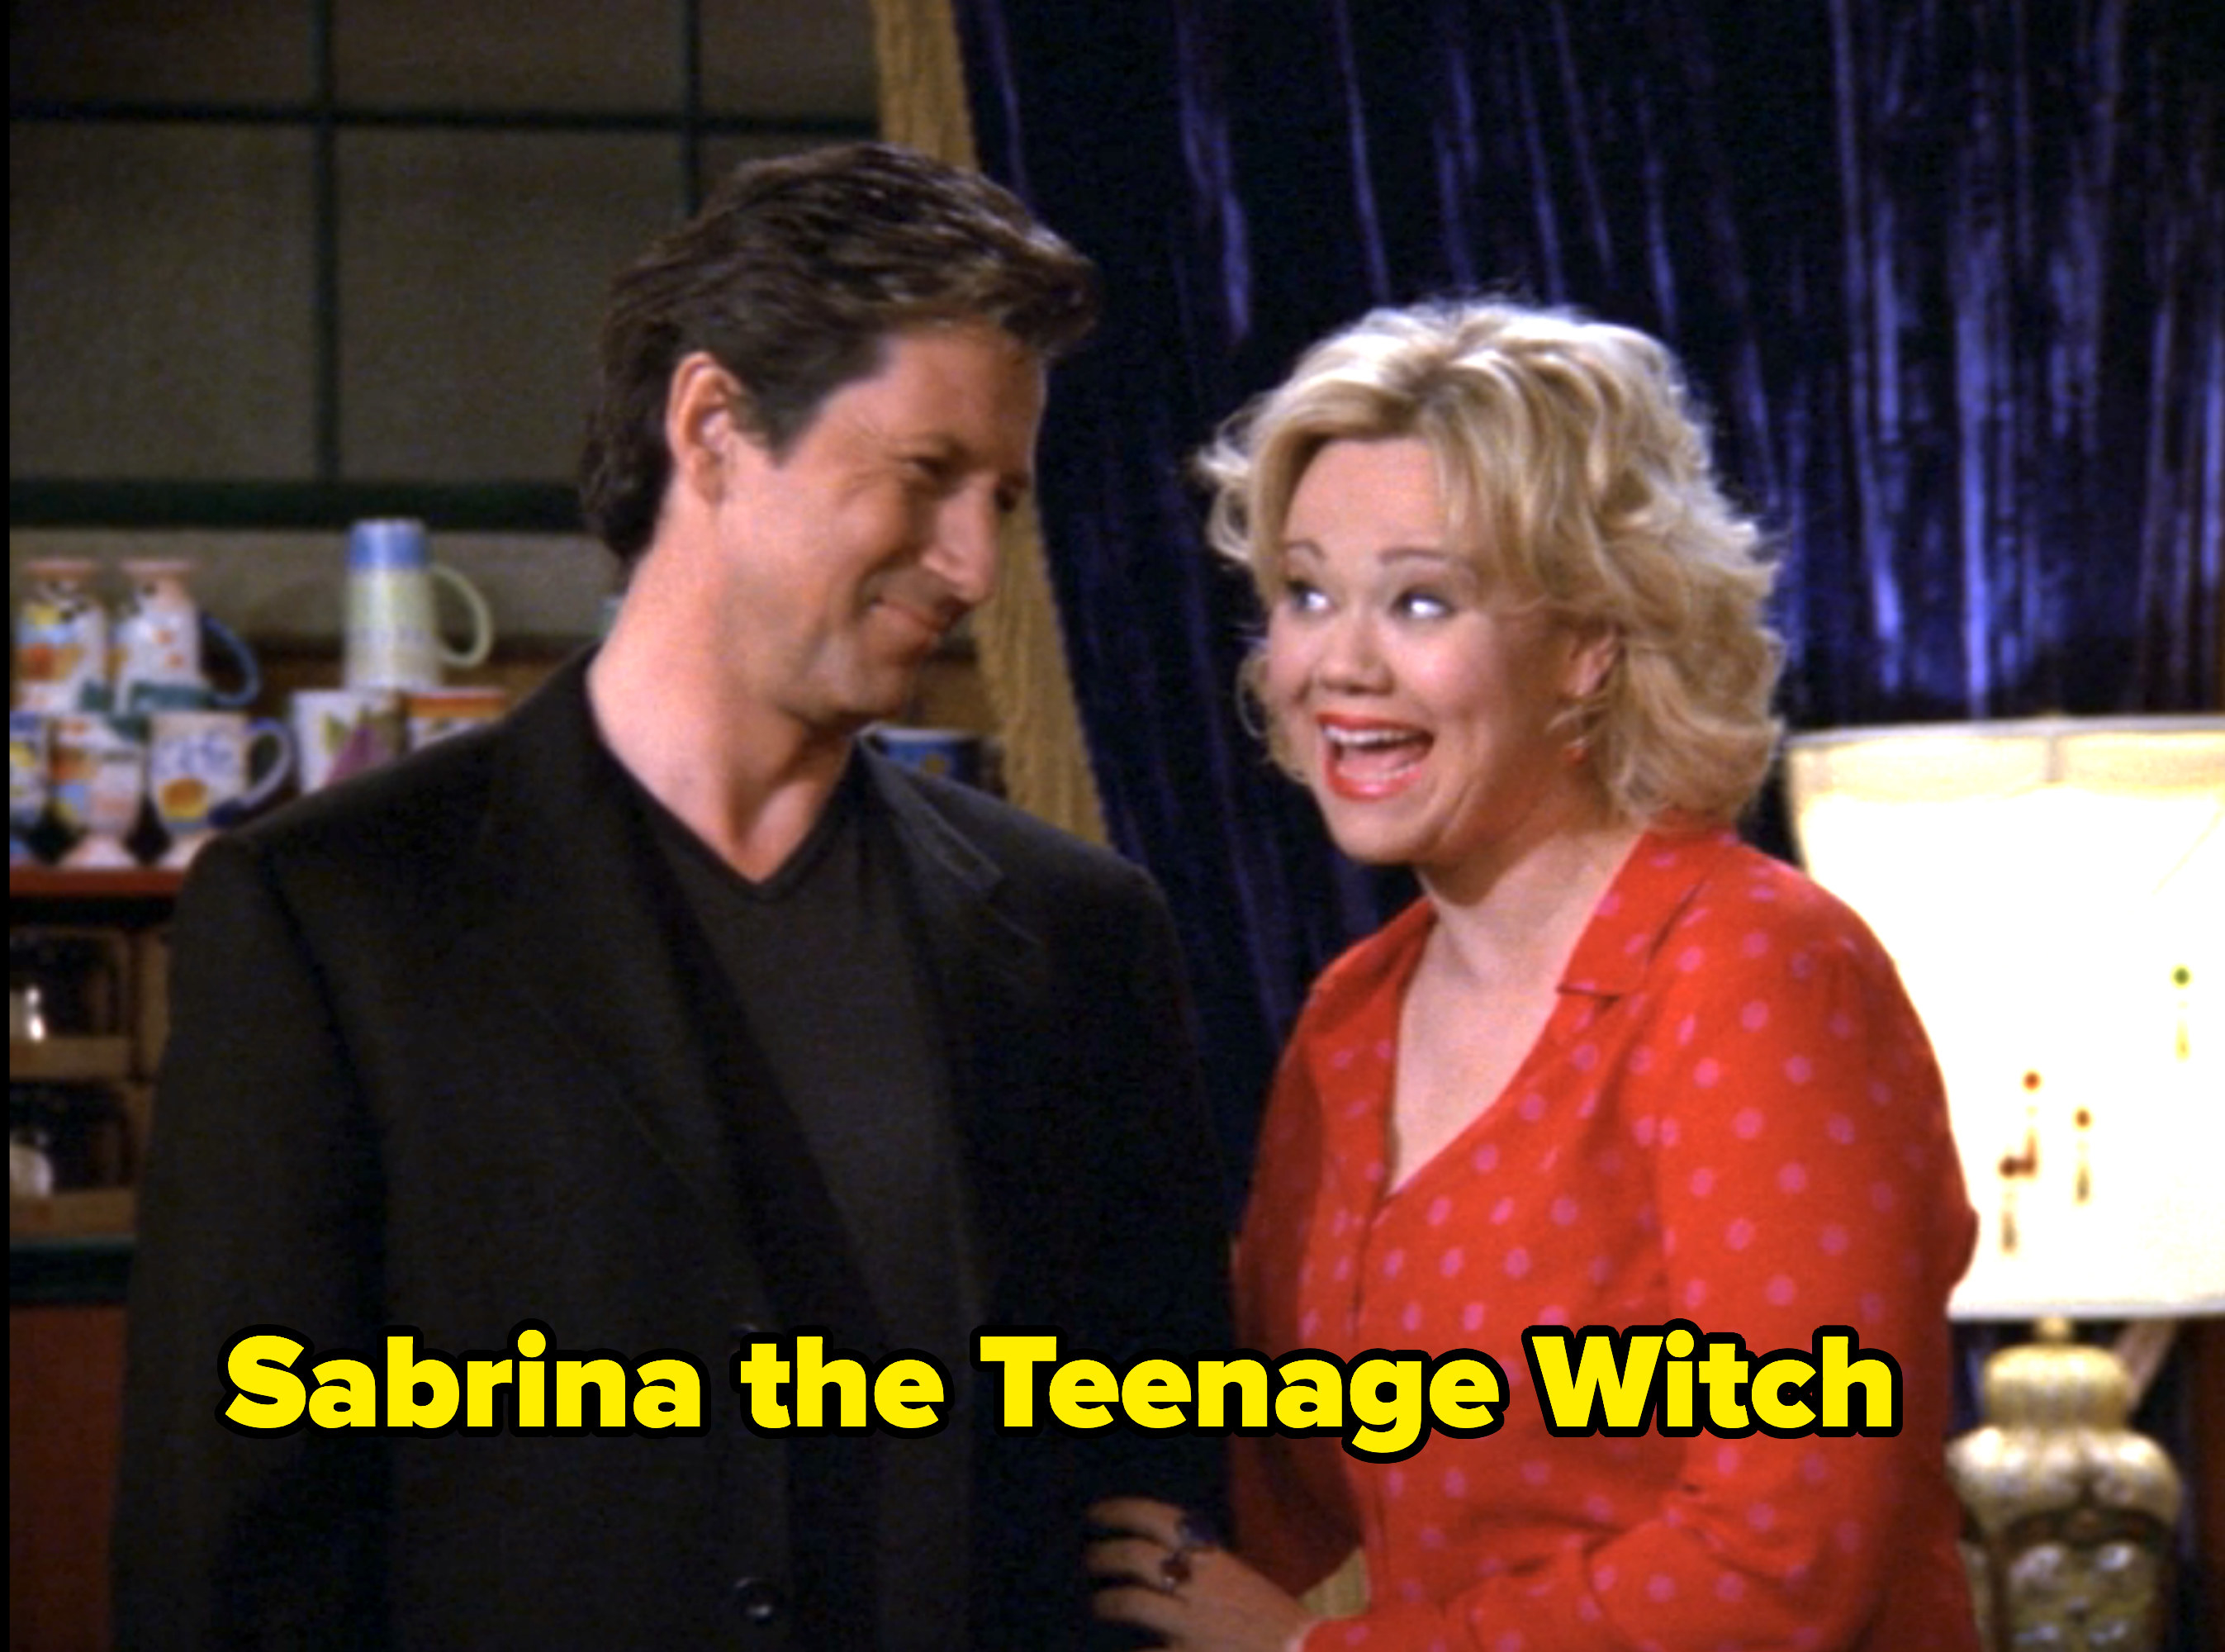 the two smiling at each other on Sabrina the Teenage Witch